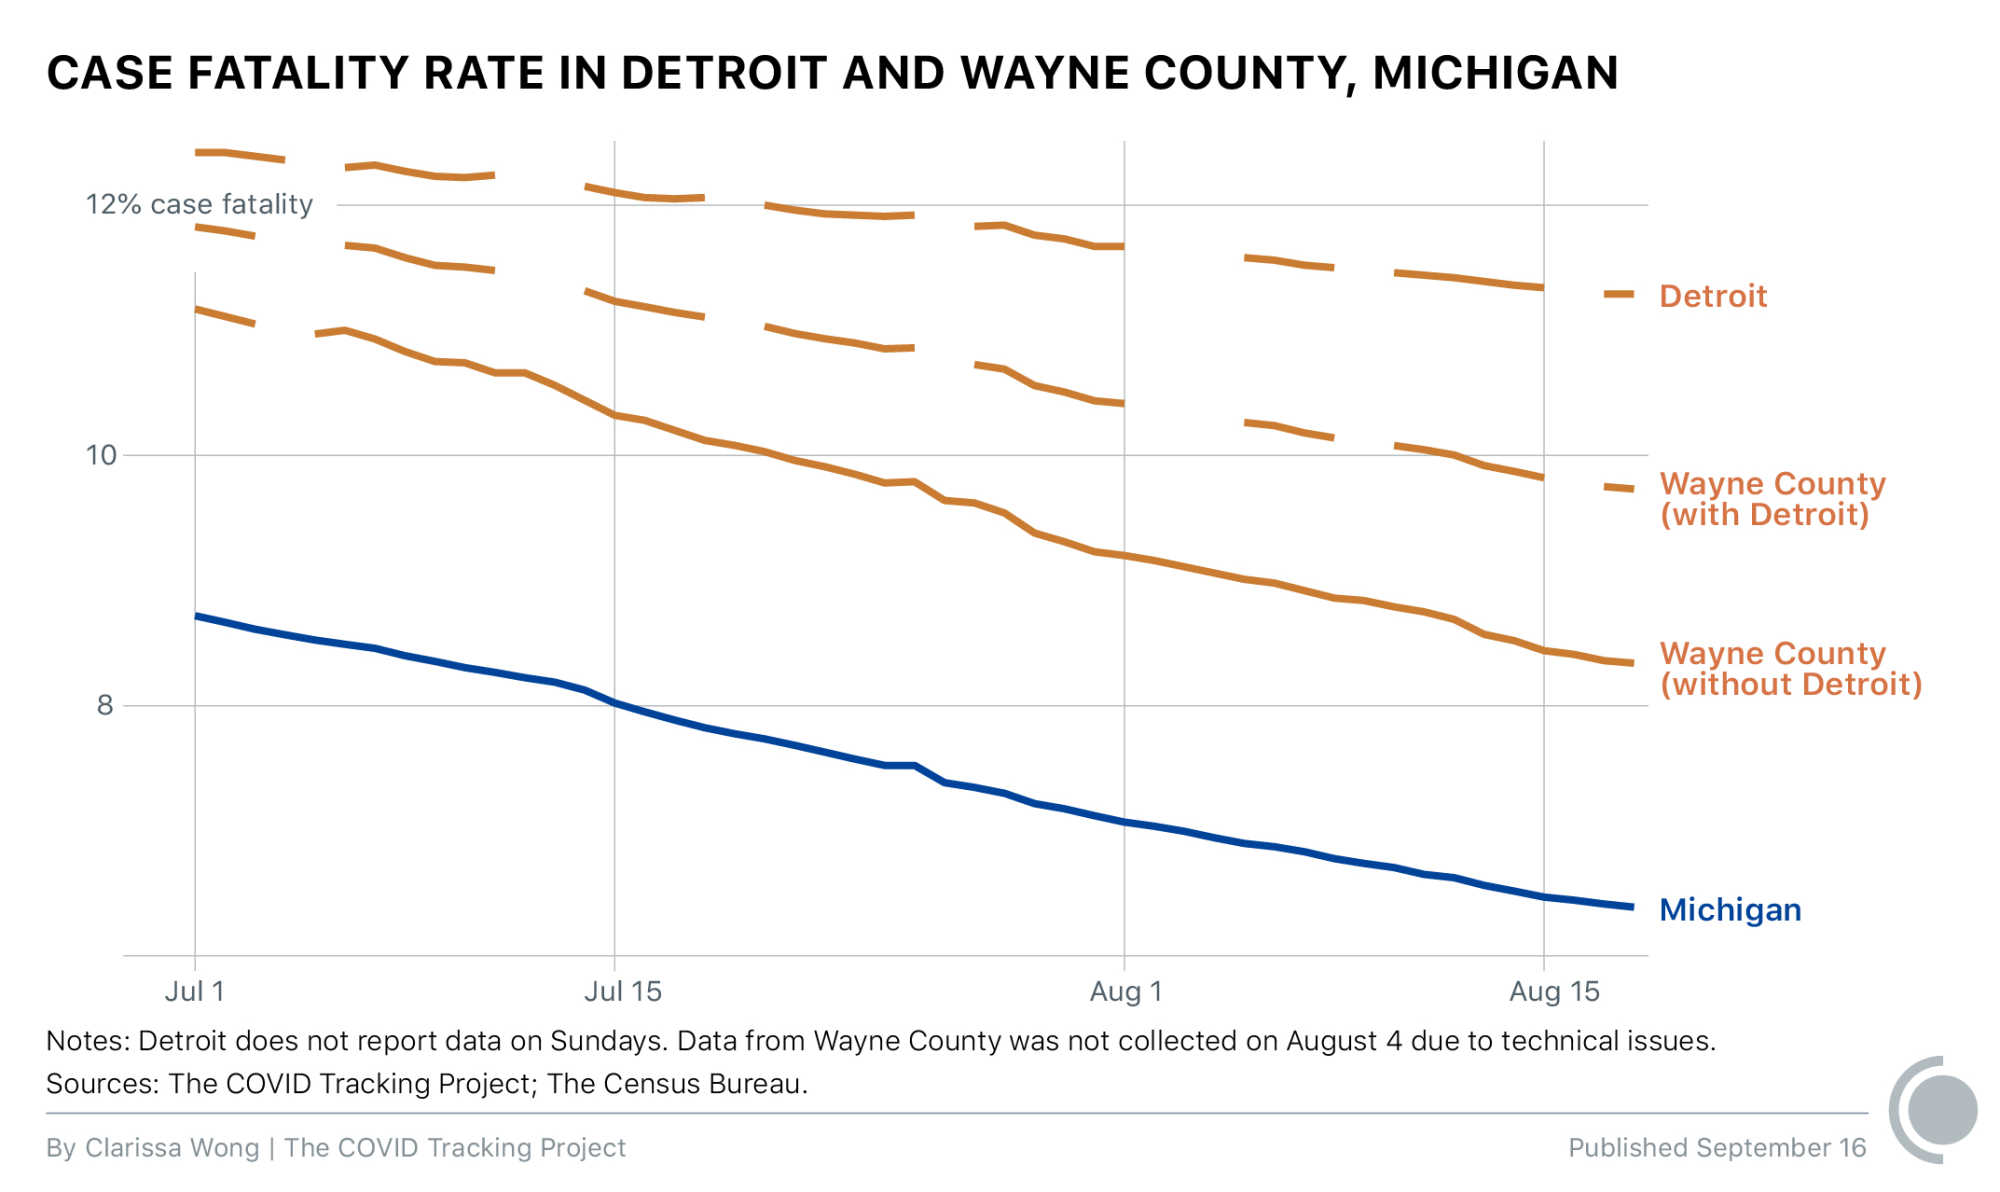 Displays the case fatality rate for Black or African American people compared to for White people in Detroit, Wayne County with Detroit, Wayne County without Detroit, and Michigan, from June through August 2020.